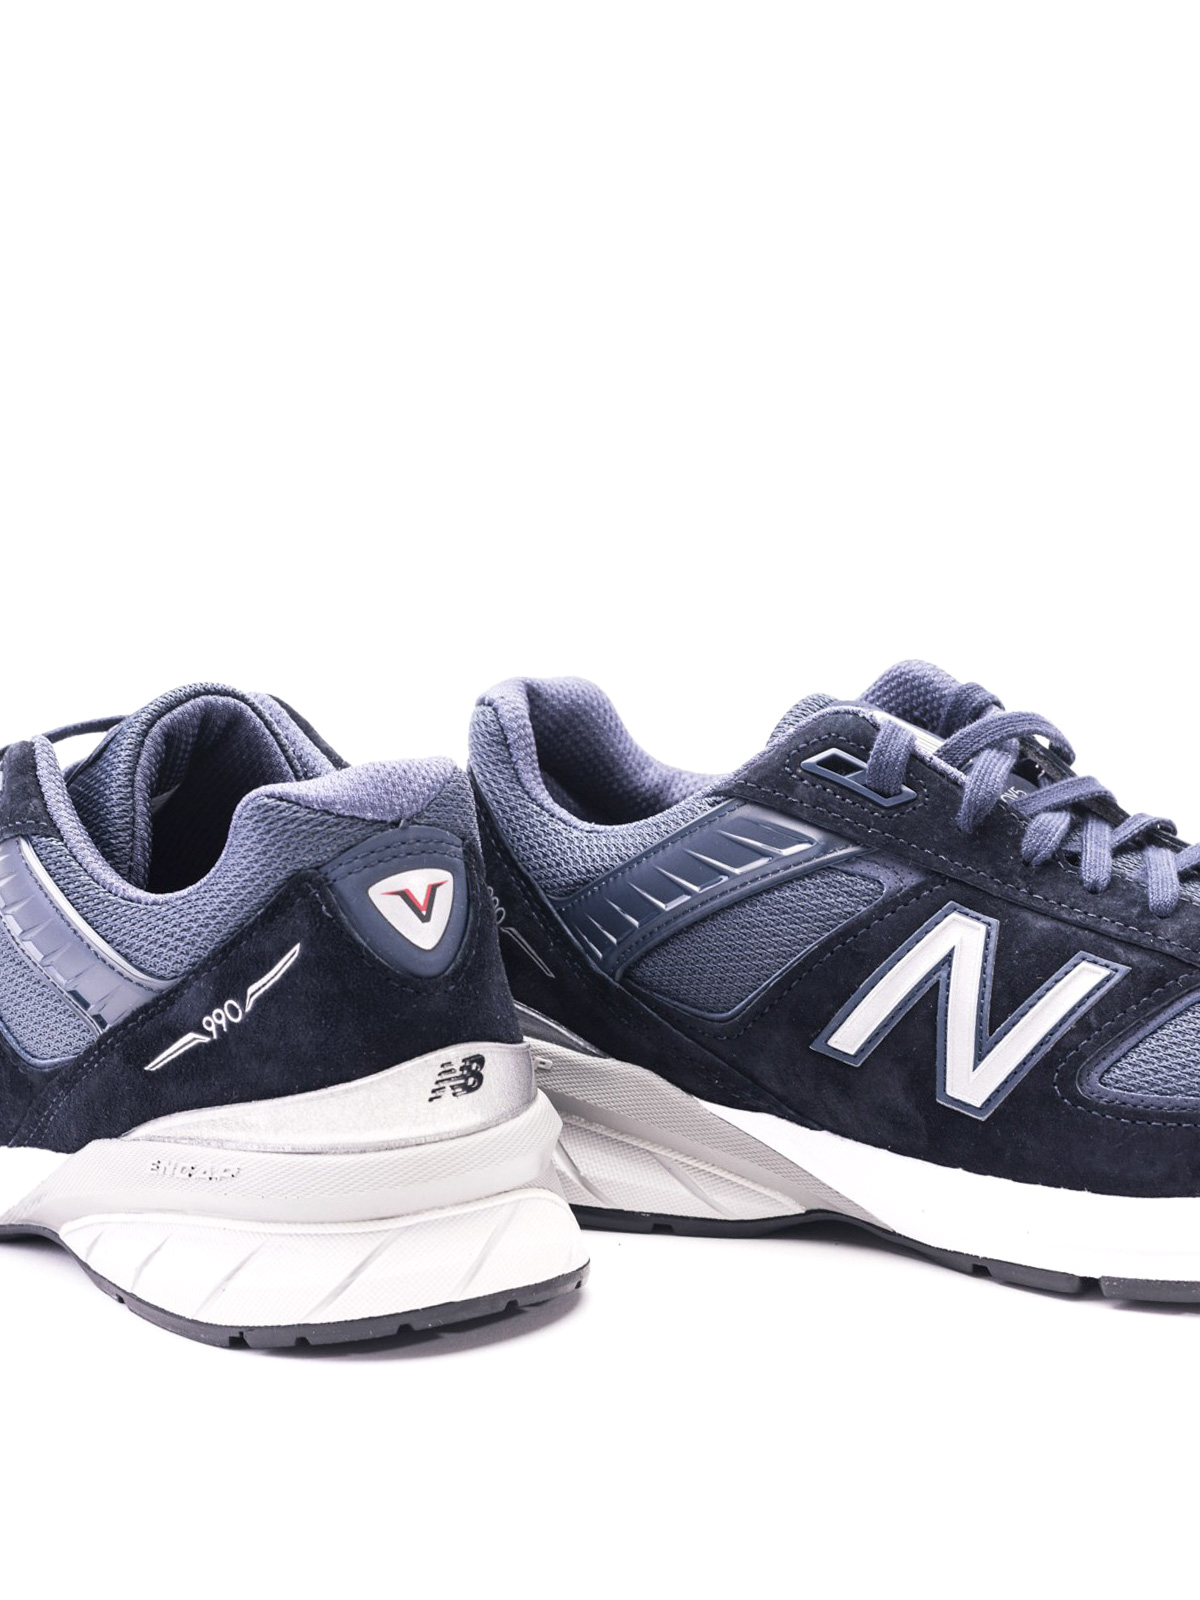 990v5 blue tech mesh and suede sneakers 